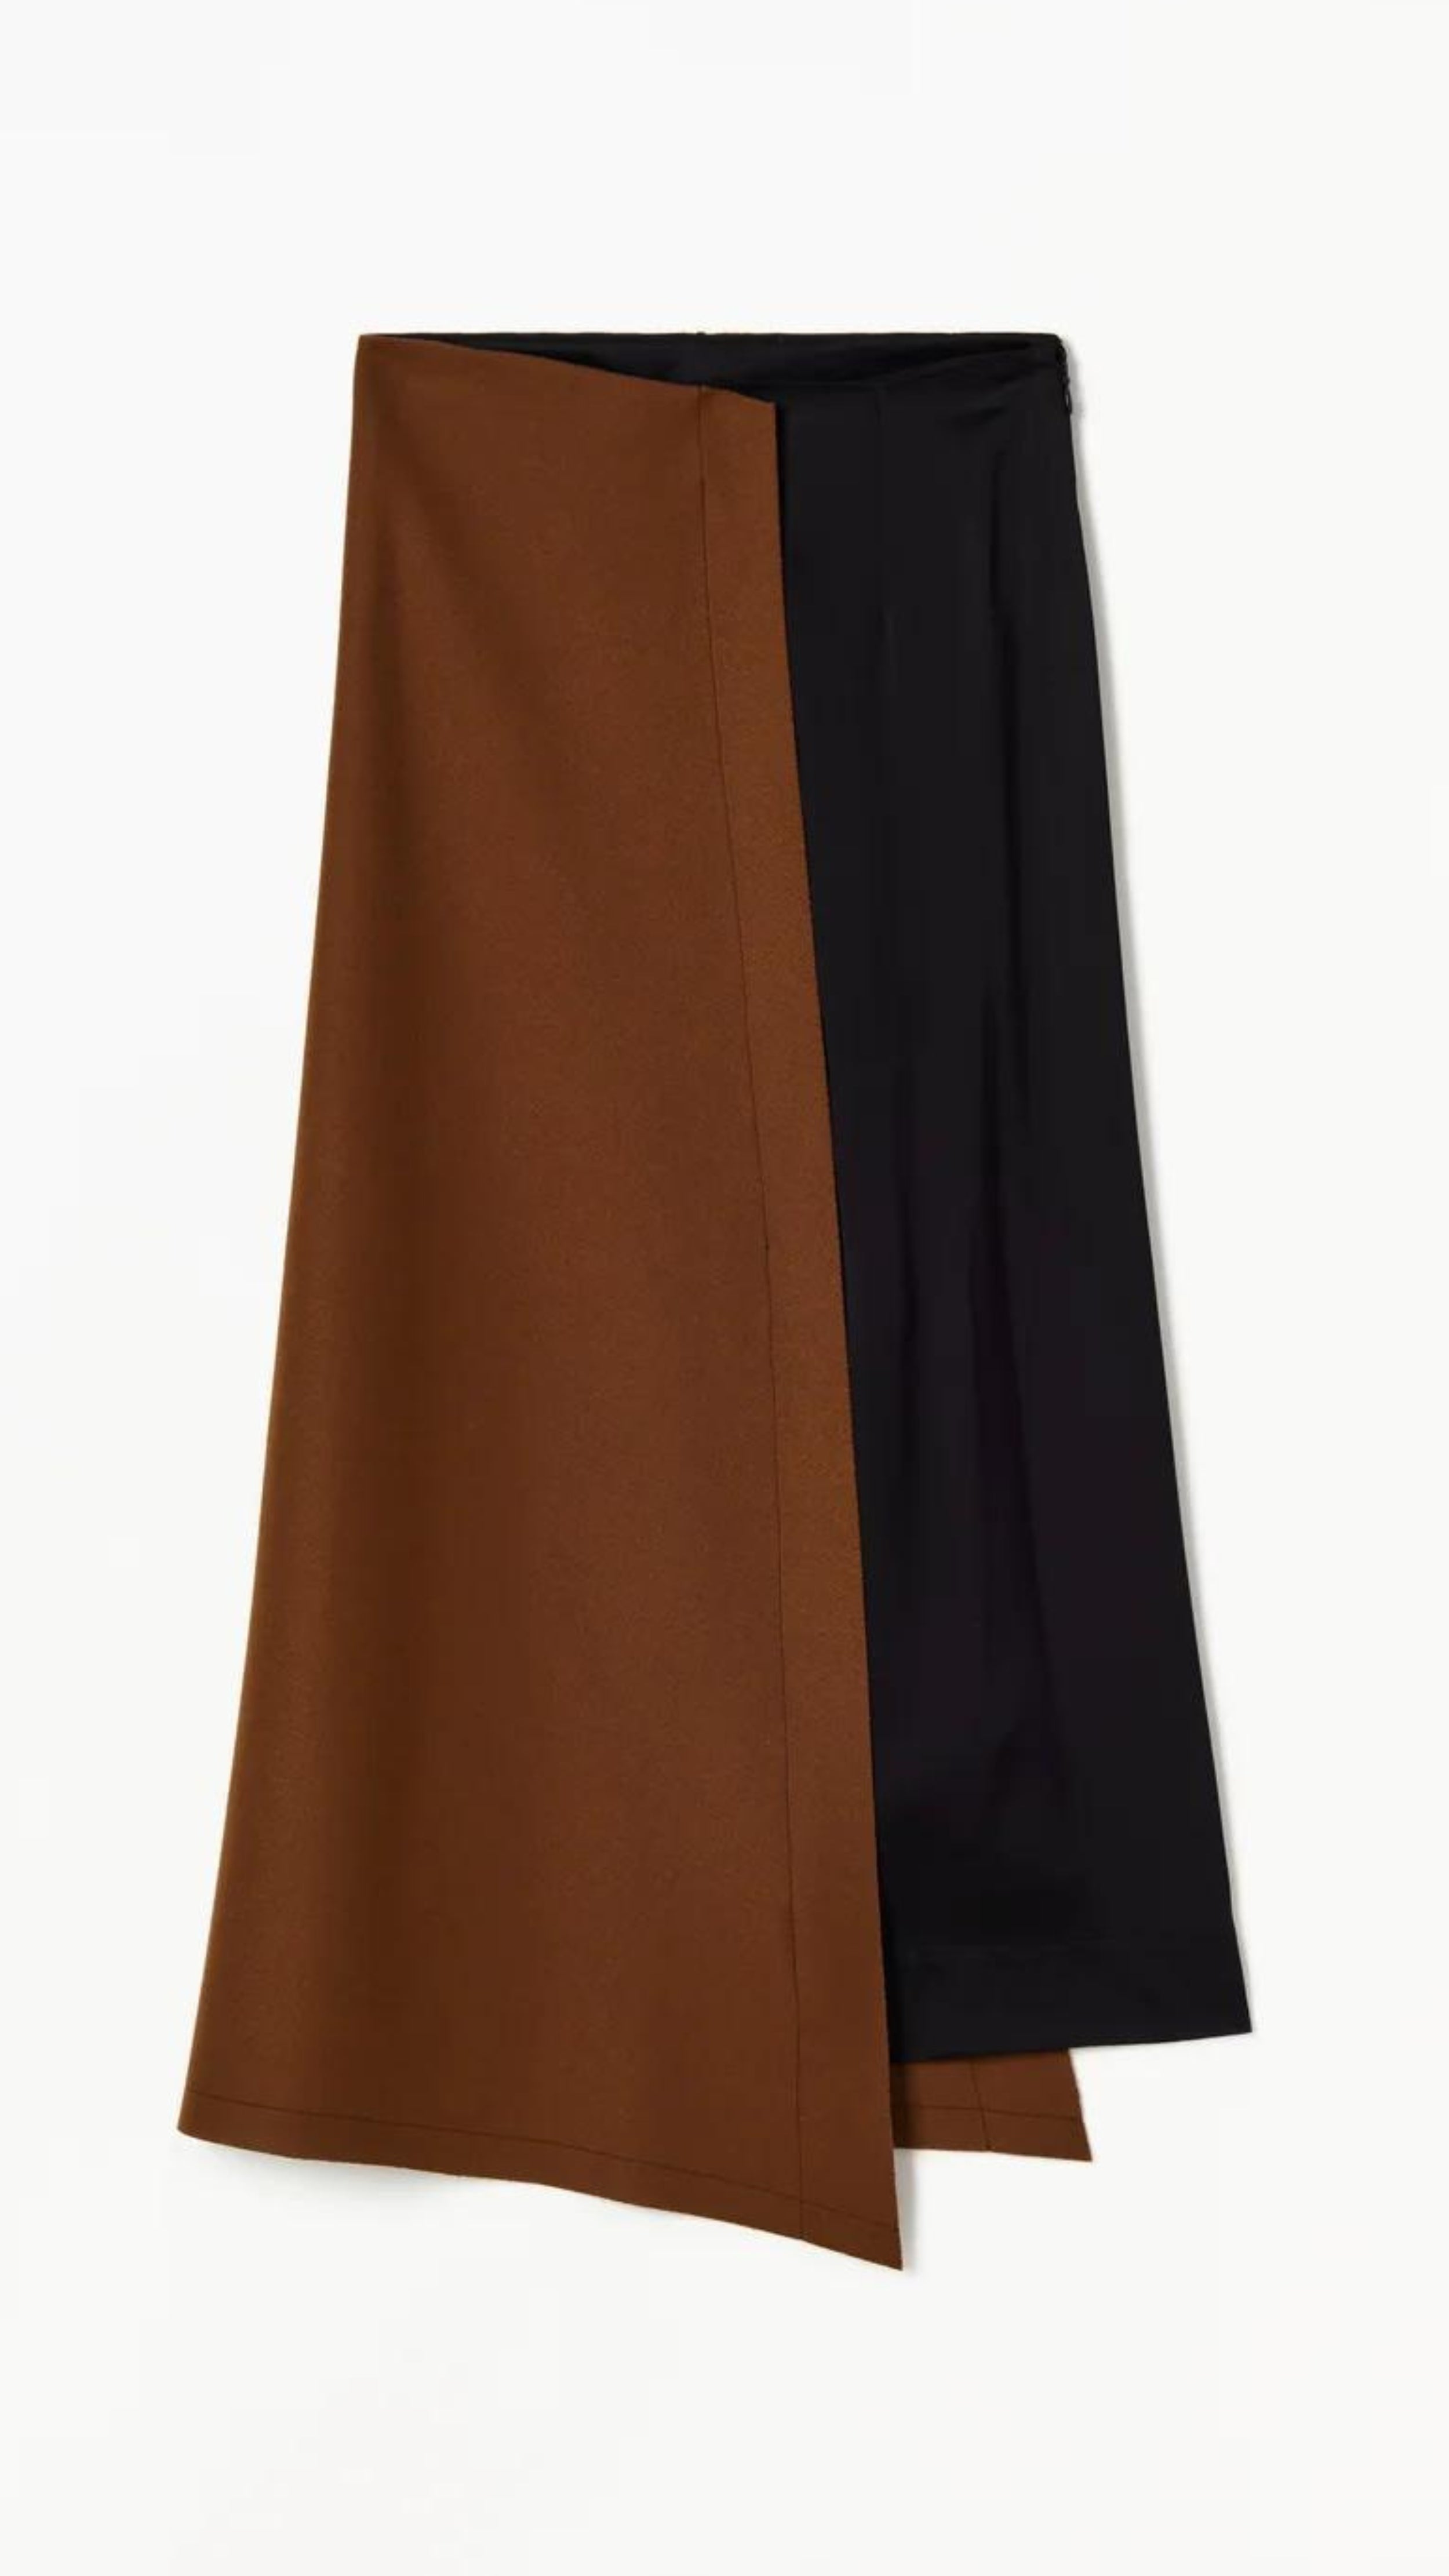 Plac C Contrast Midi Skirt. Paneled midi skirt in sofy brown chestnut wool and black satin. Modern and classic in shape and colors. Shown here from the front view.